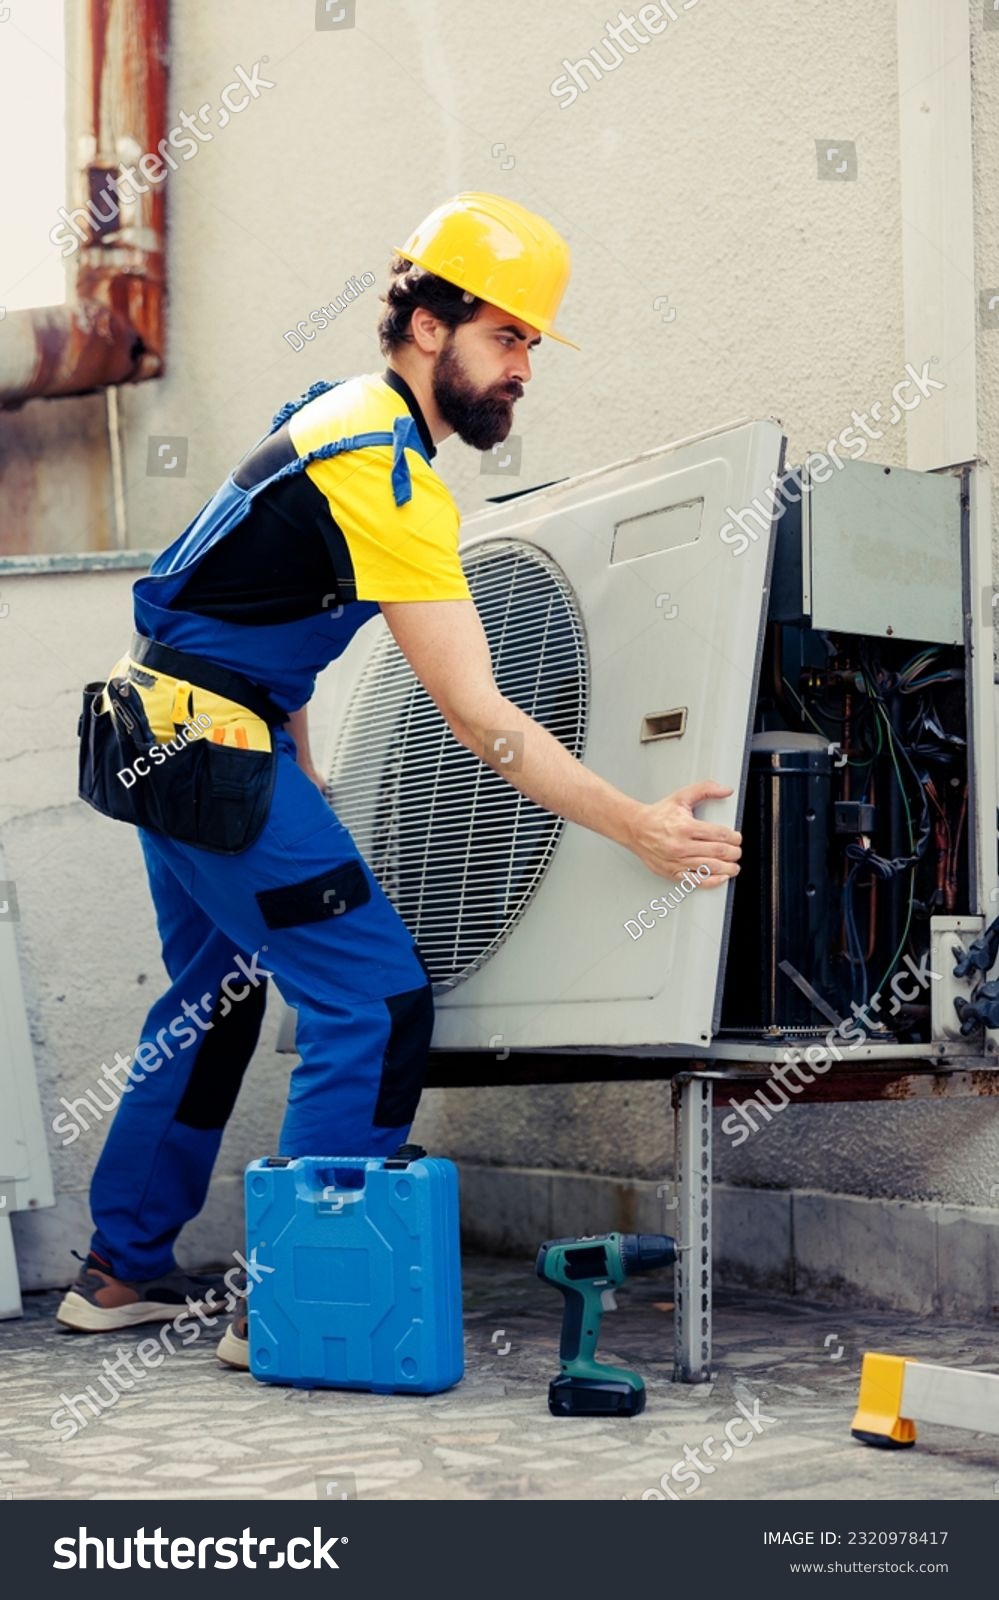 Licensed expert starting work on out of order air conditioner, using power tool to dismantle condenser metal coil panel. Skilled wireman opening hvac system to check for bad wiring #2320978417